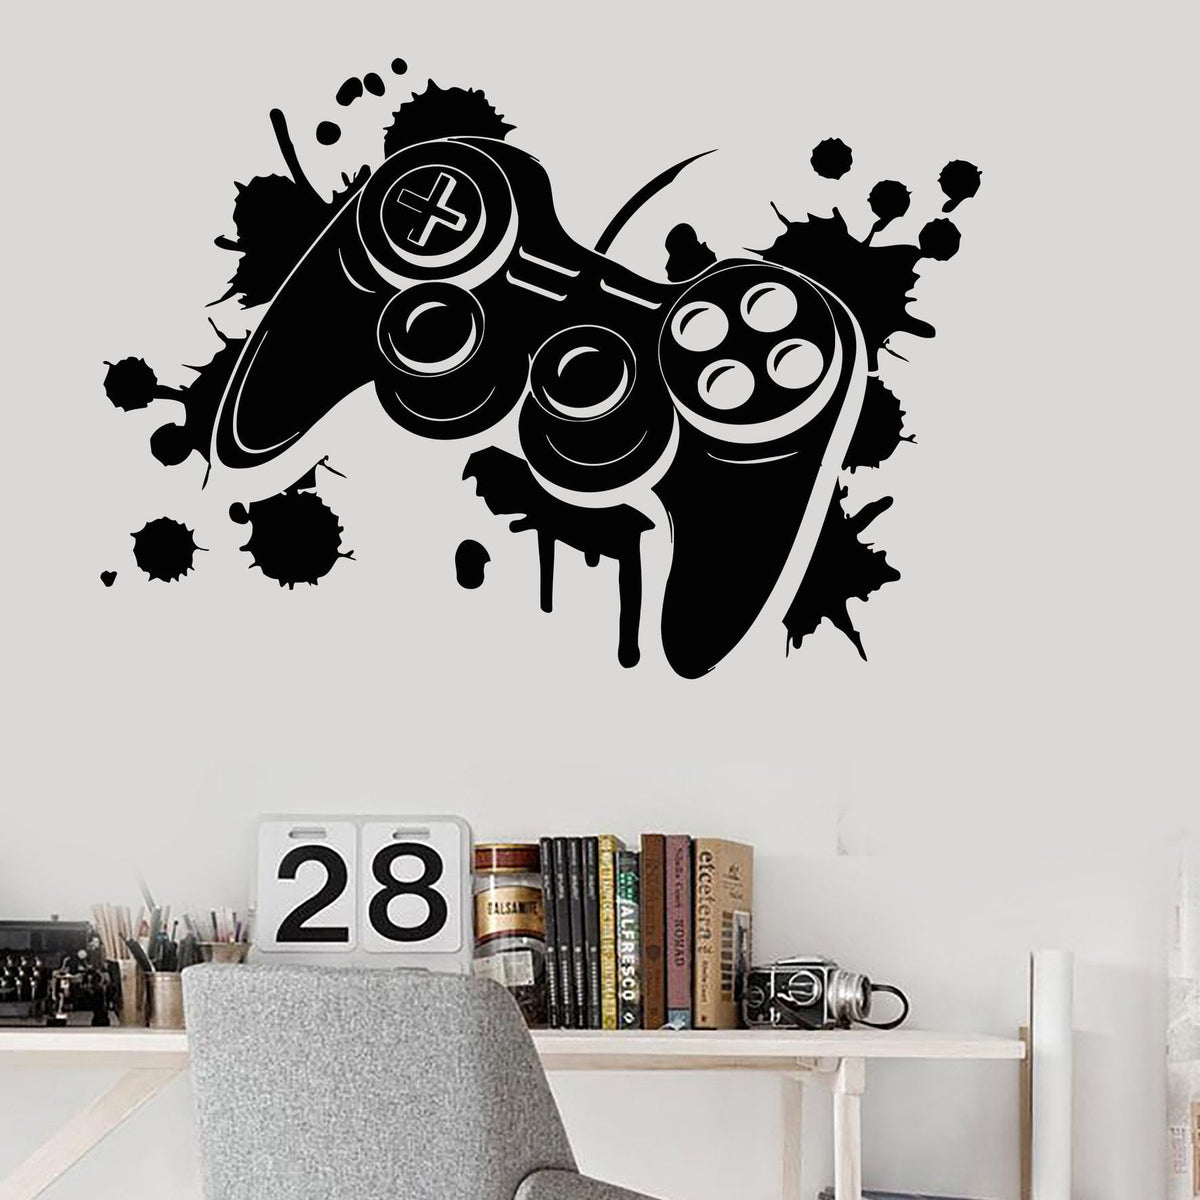 Vinyl Wall Decal Gamer Quote Video Game Gaming Stickers Mural (ig3733)